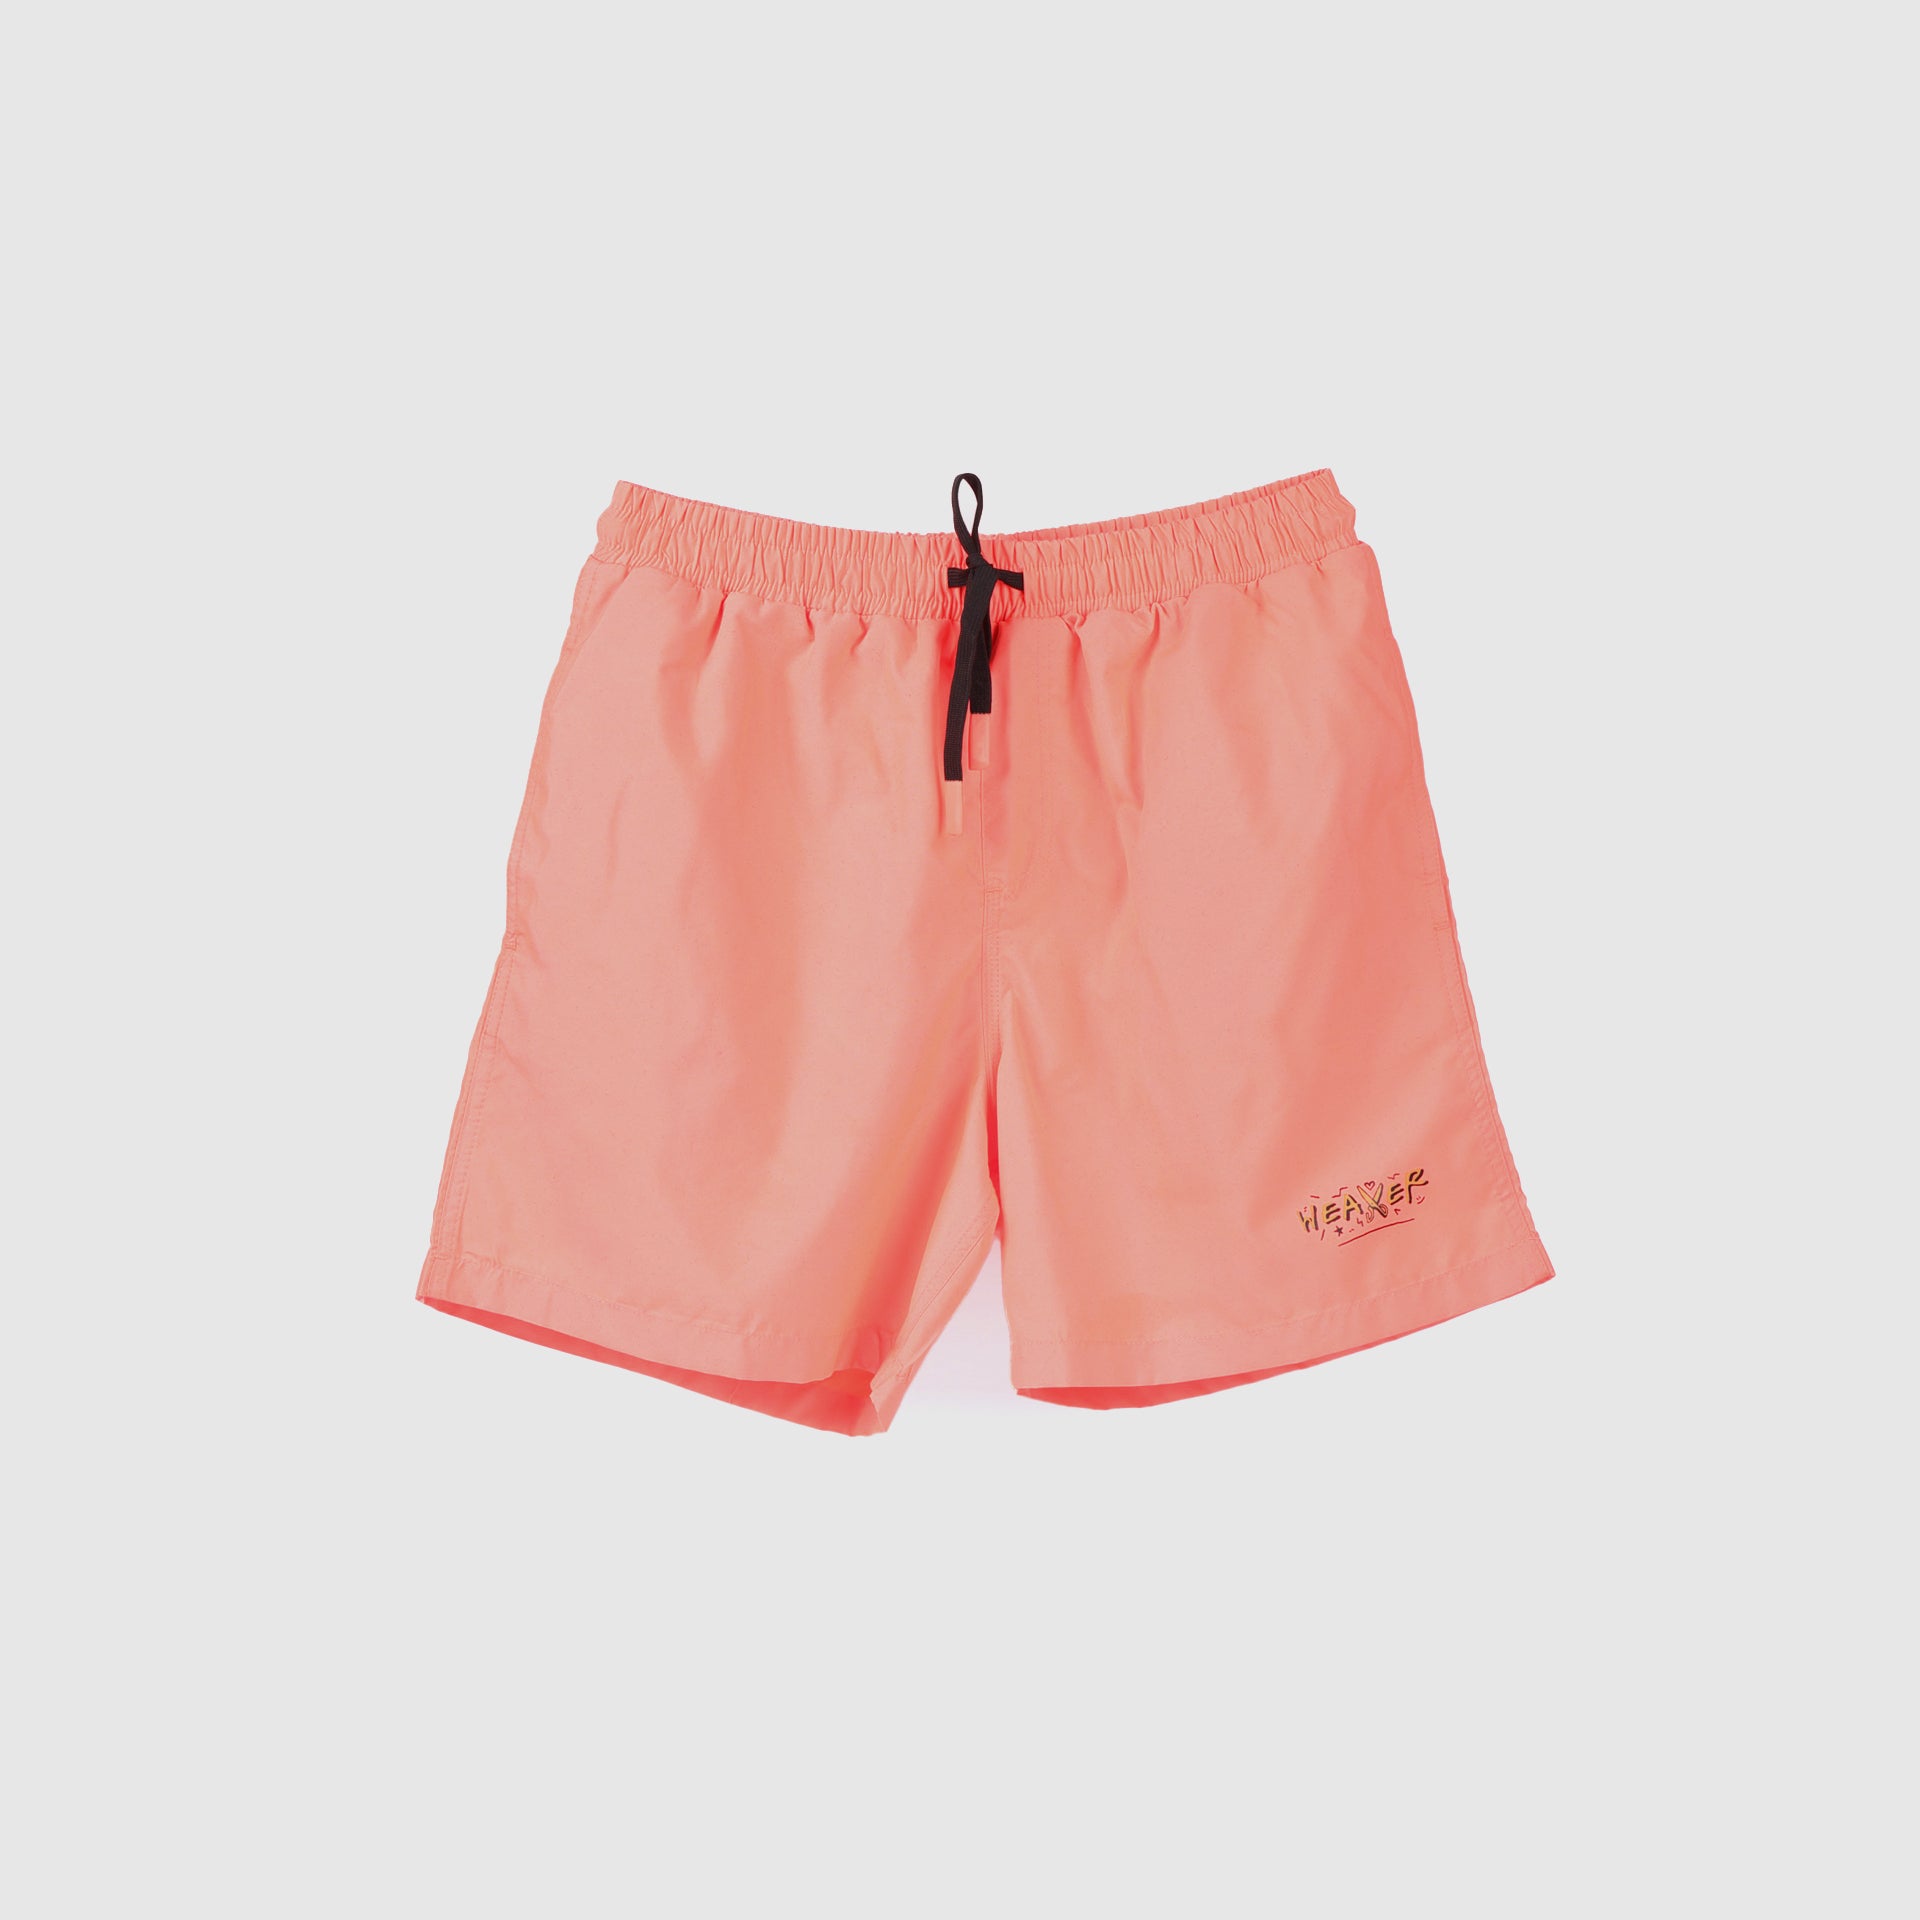 Pink Swimming Plain Shorts From Weaver Design